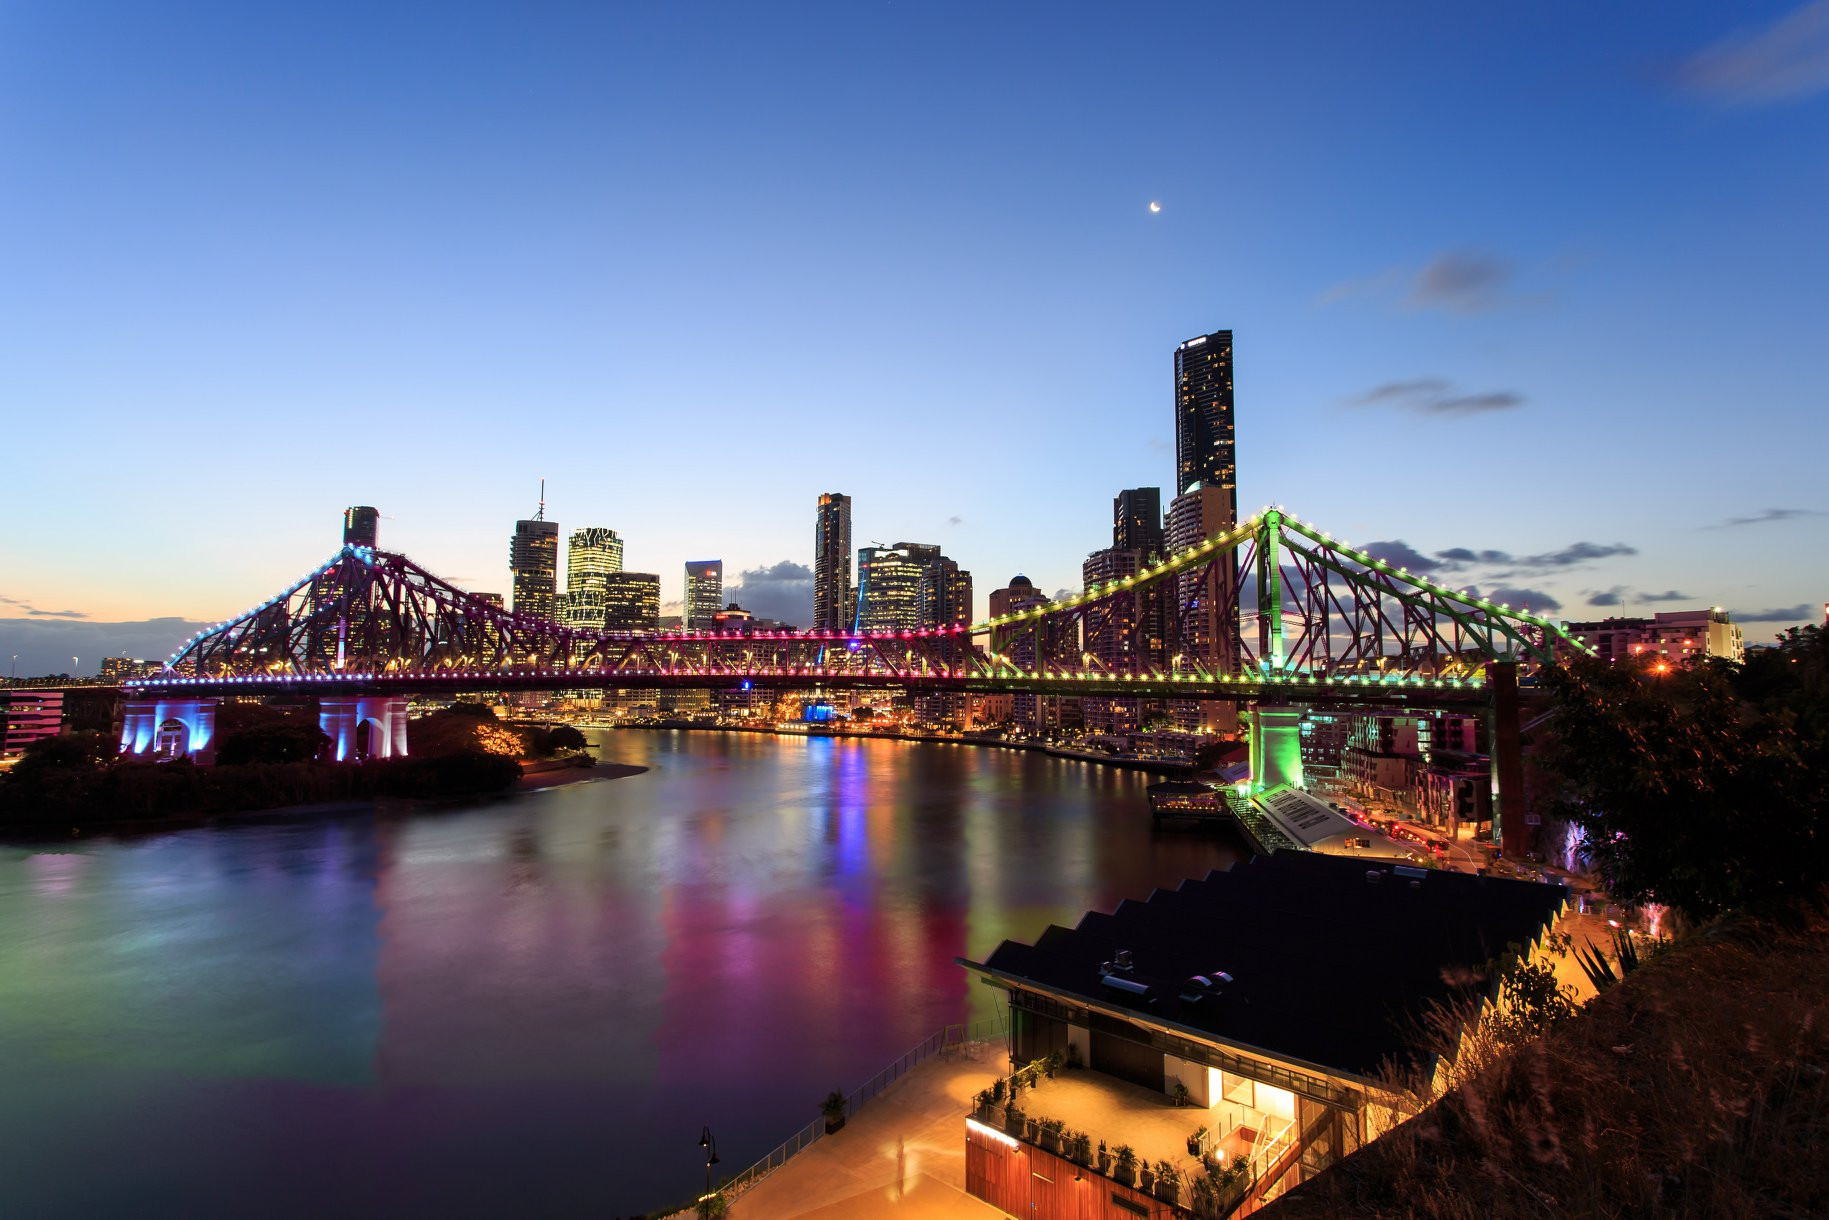 Lights on Brisbane's bridges were lit up in celebration last month after the city was accorded 